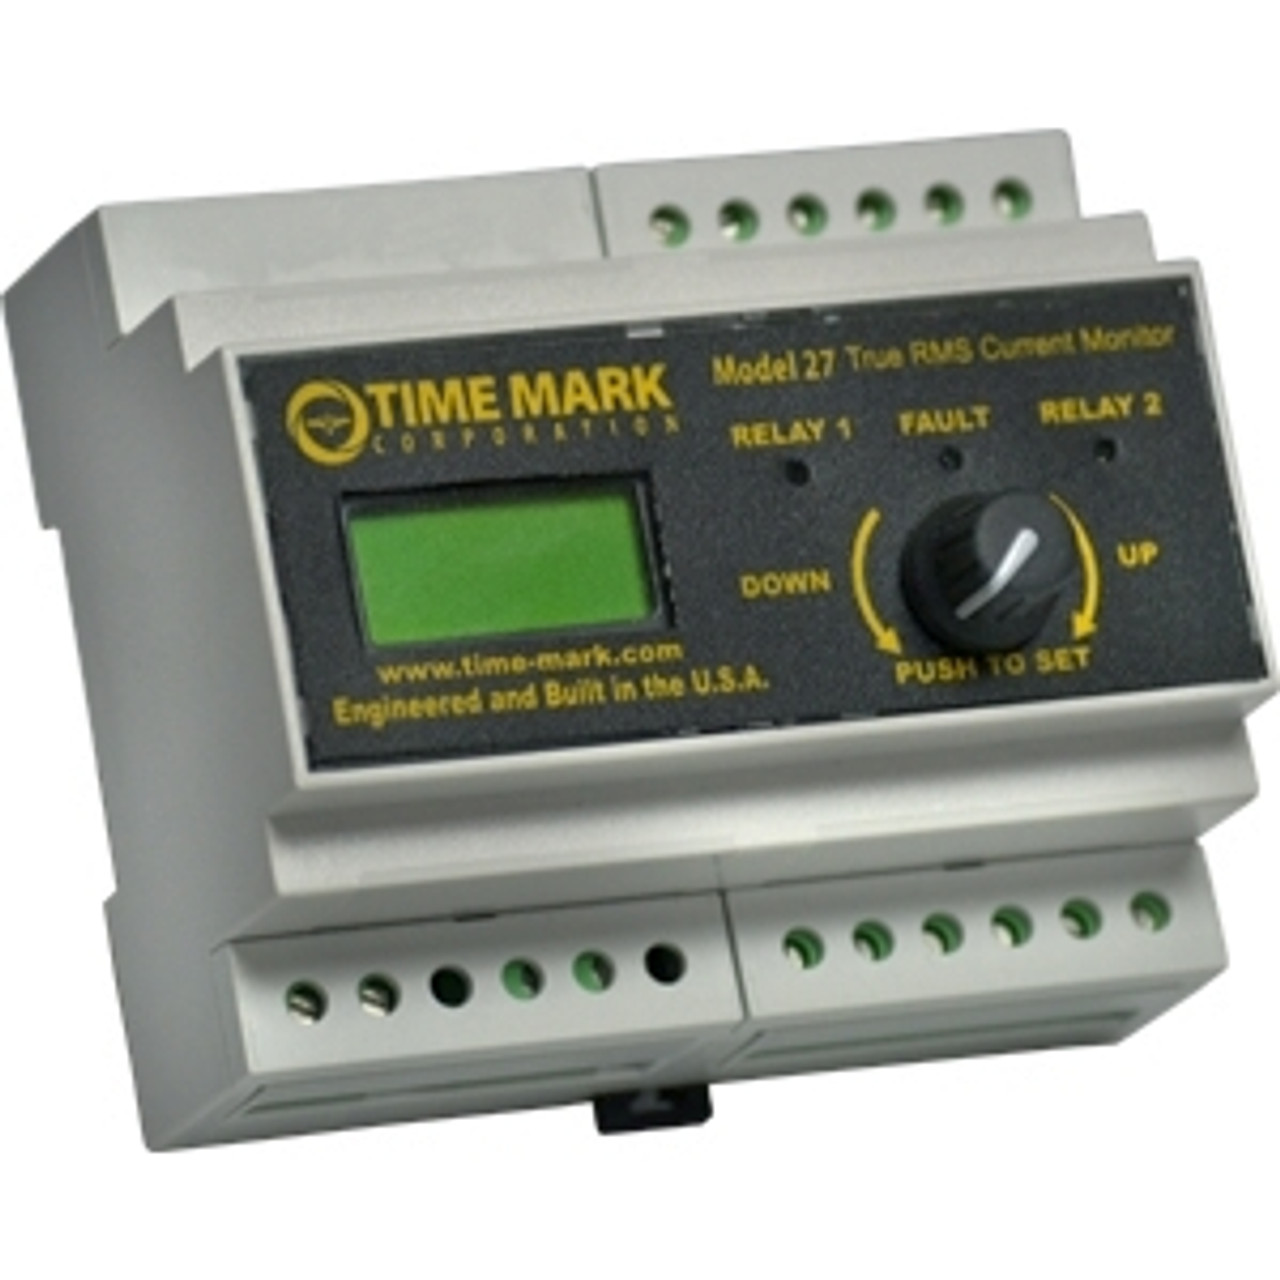 TimeMark 27/SG Current Monitor Relays